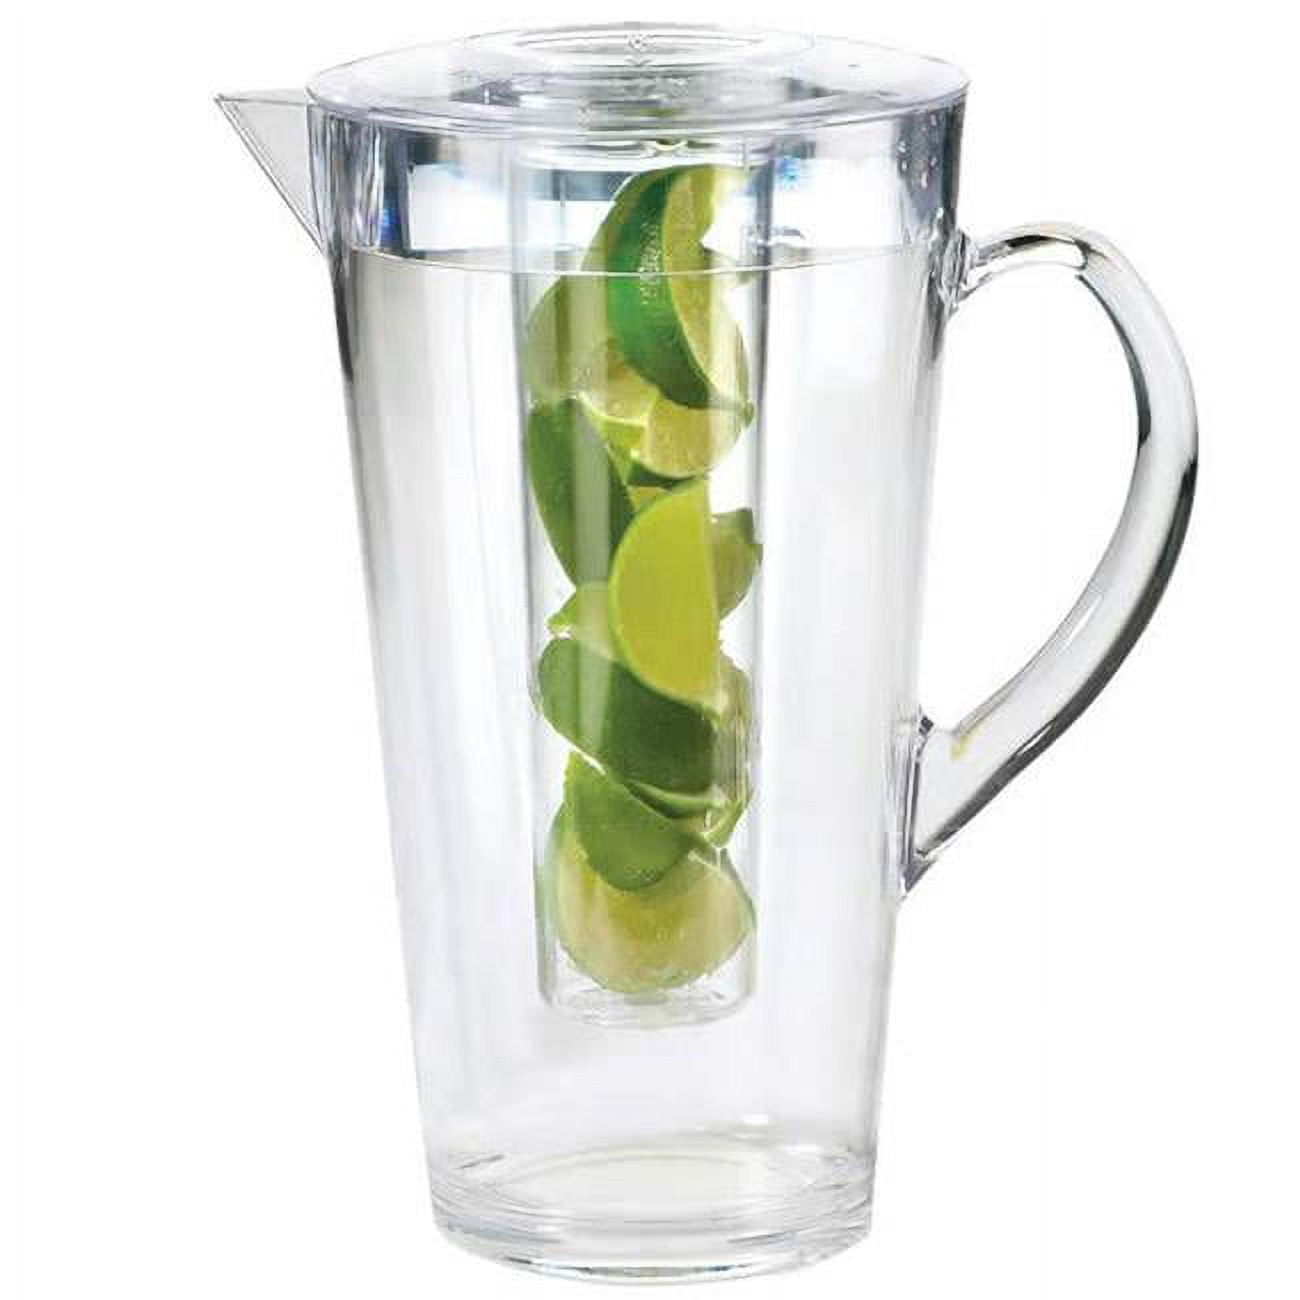 Picture of Cal Mil 682-INFUSION 2 ltr Polycarbonate Pitcher with Infusion Chamber - 9X9 x 10 in.